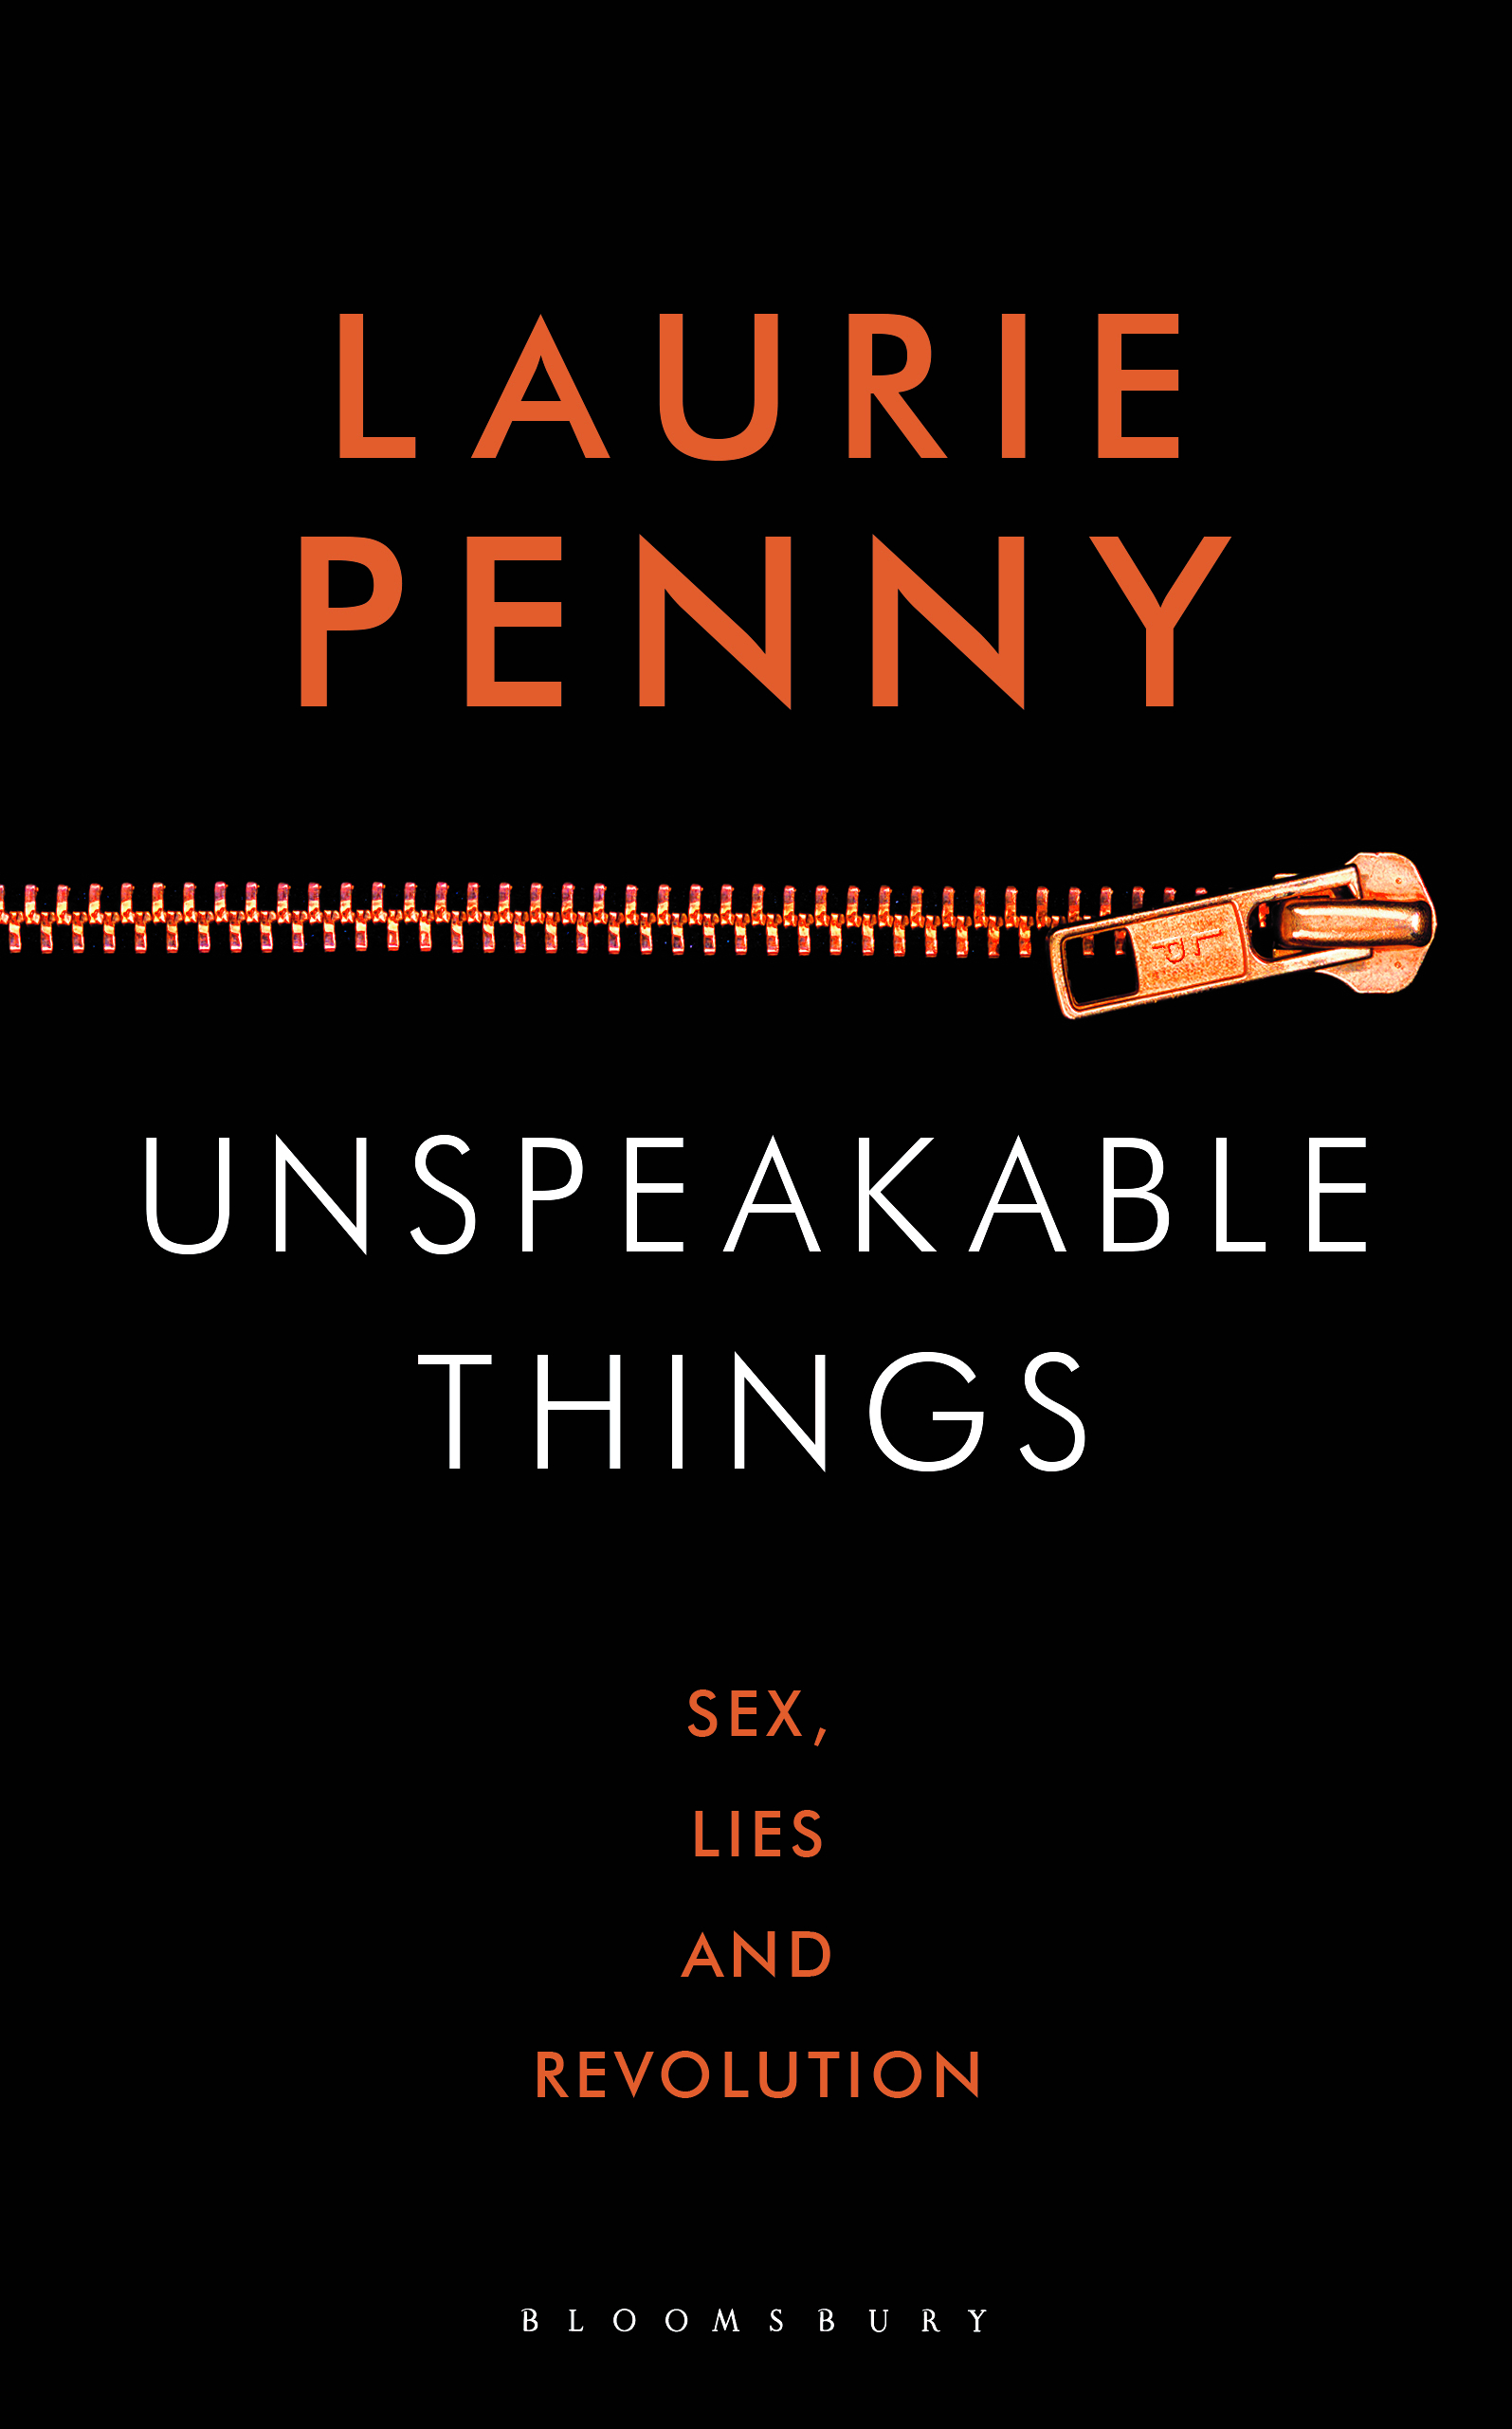 Book Launch: Unspeakable Things by Laurie Penny, with Molly Crabapple